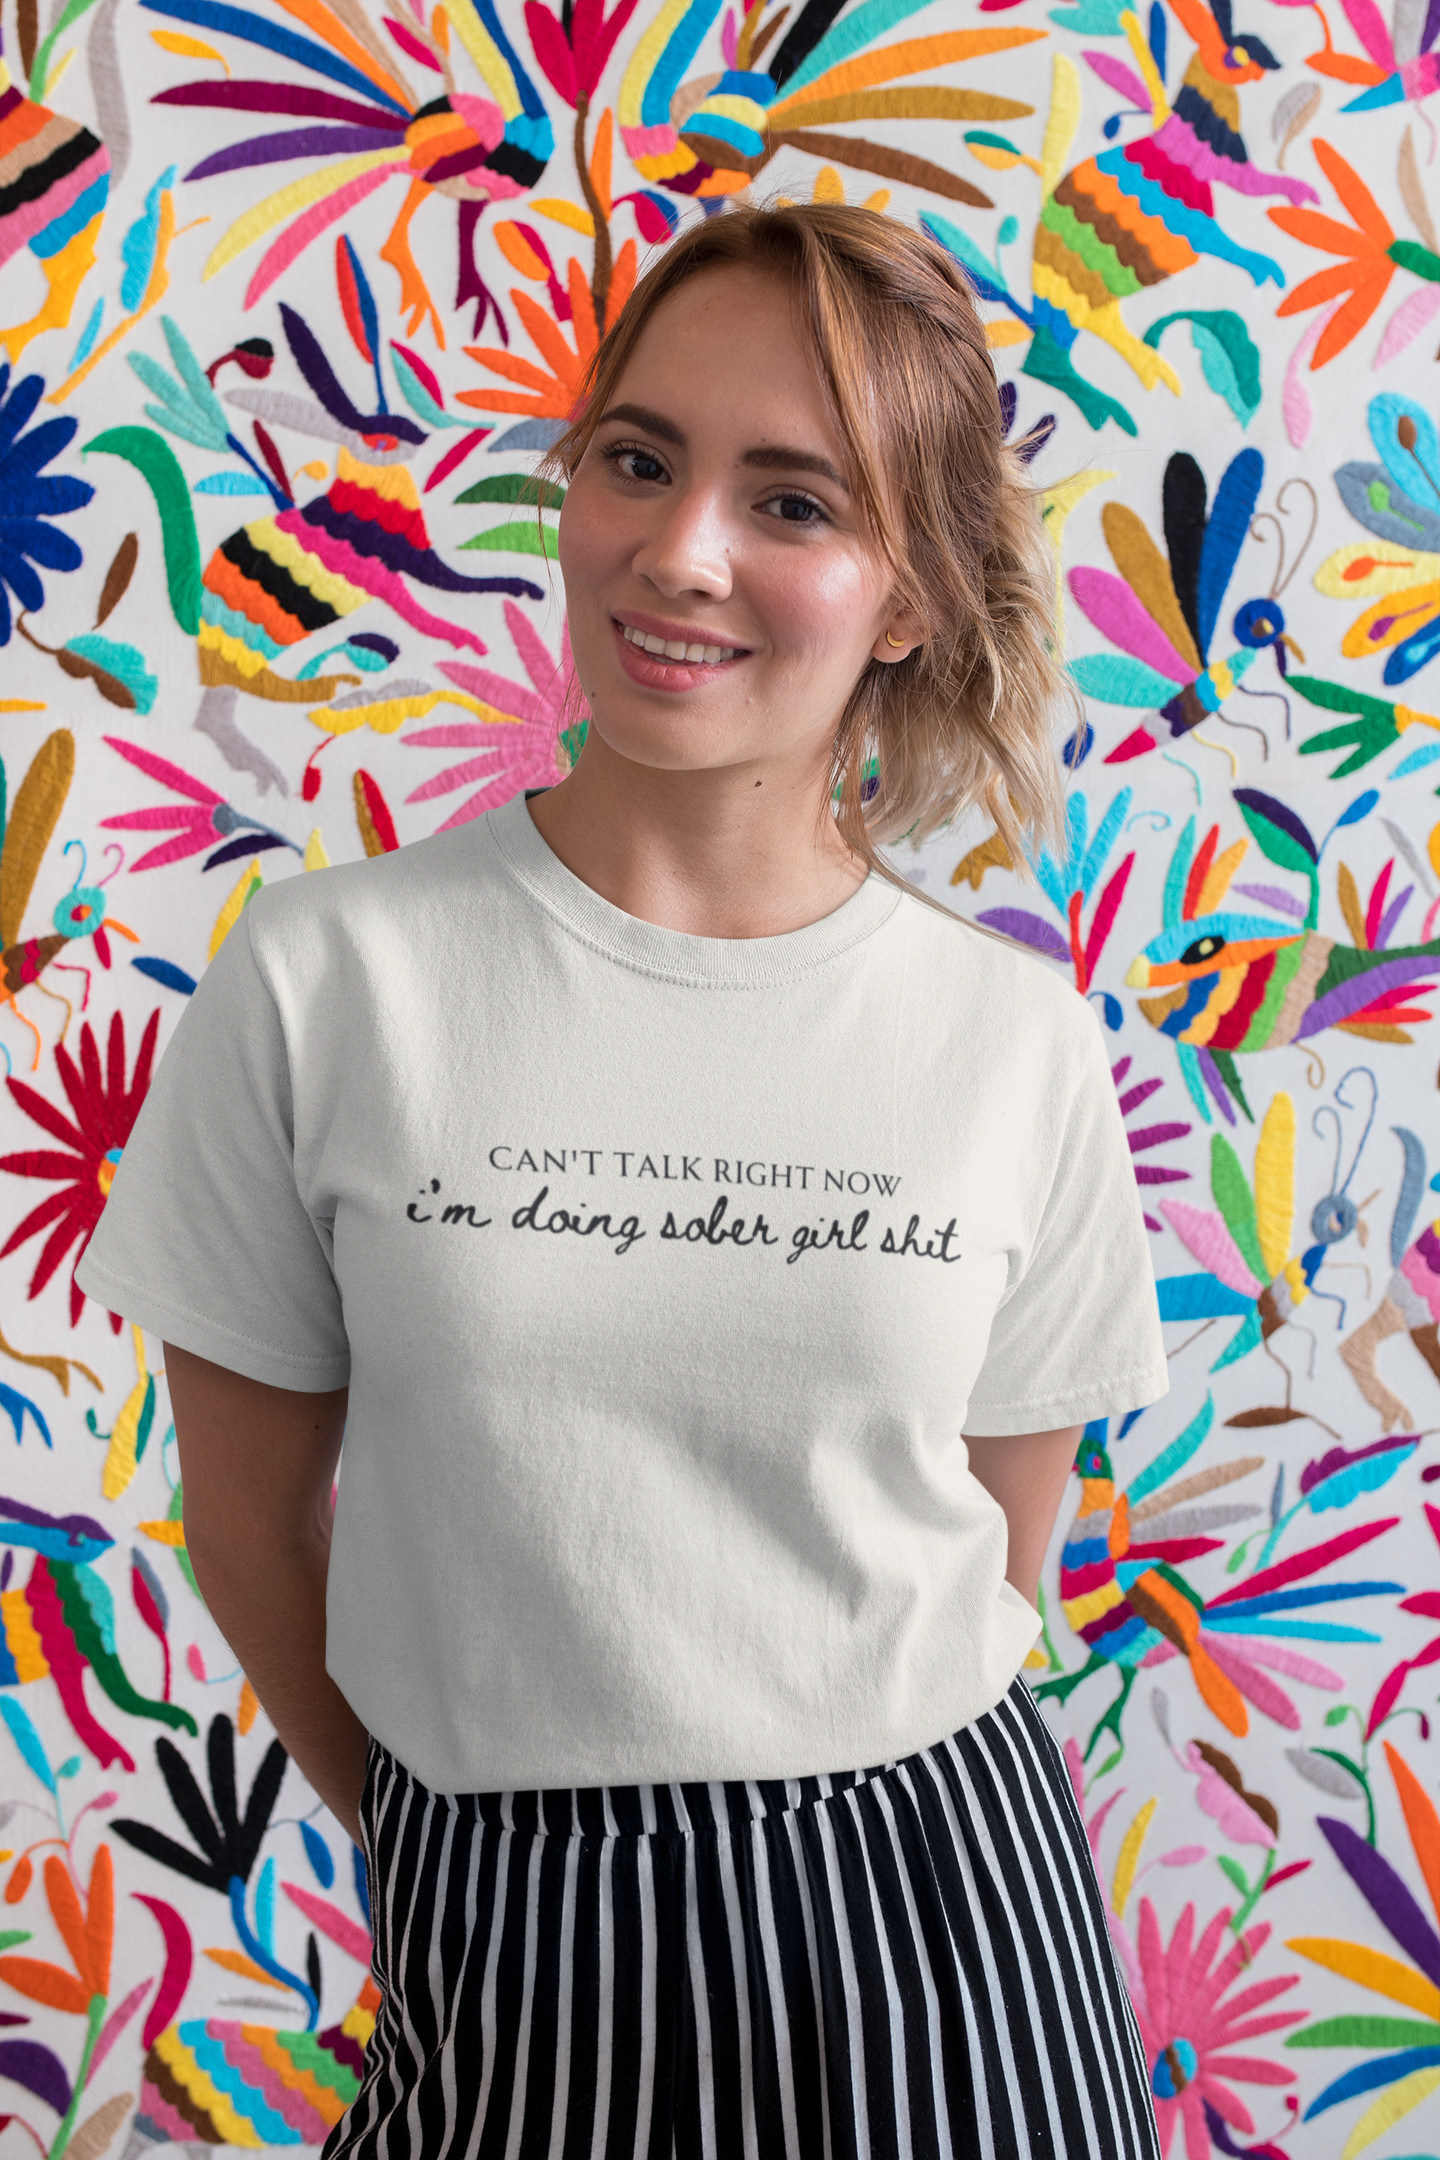 girl wearing a sobriety themed t shirt that says "can't talk right now, I'm doing sober girl shit."